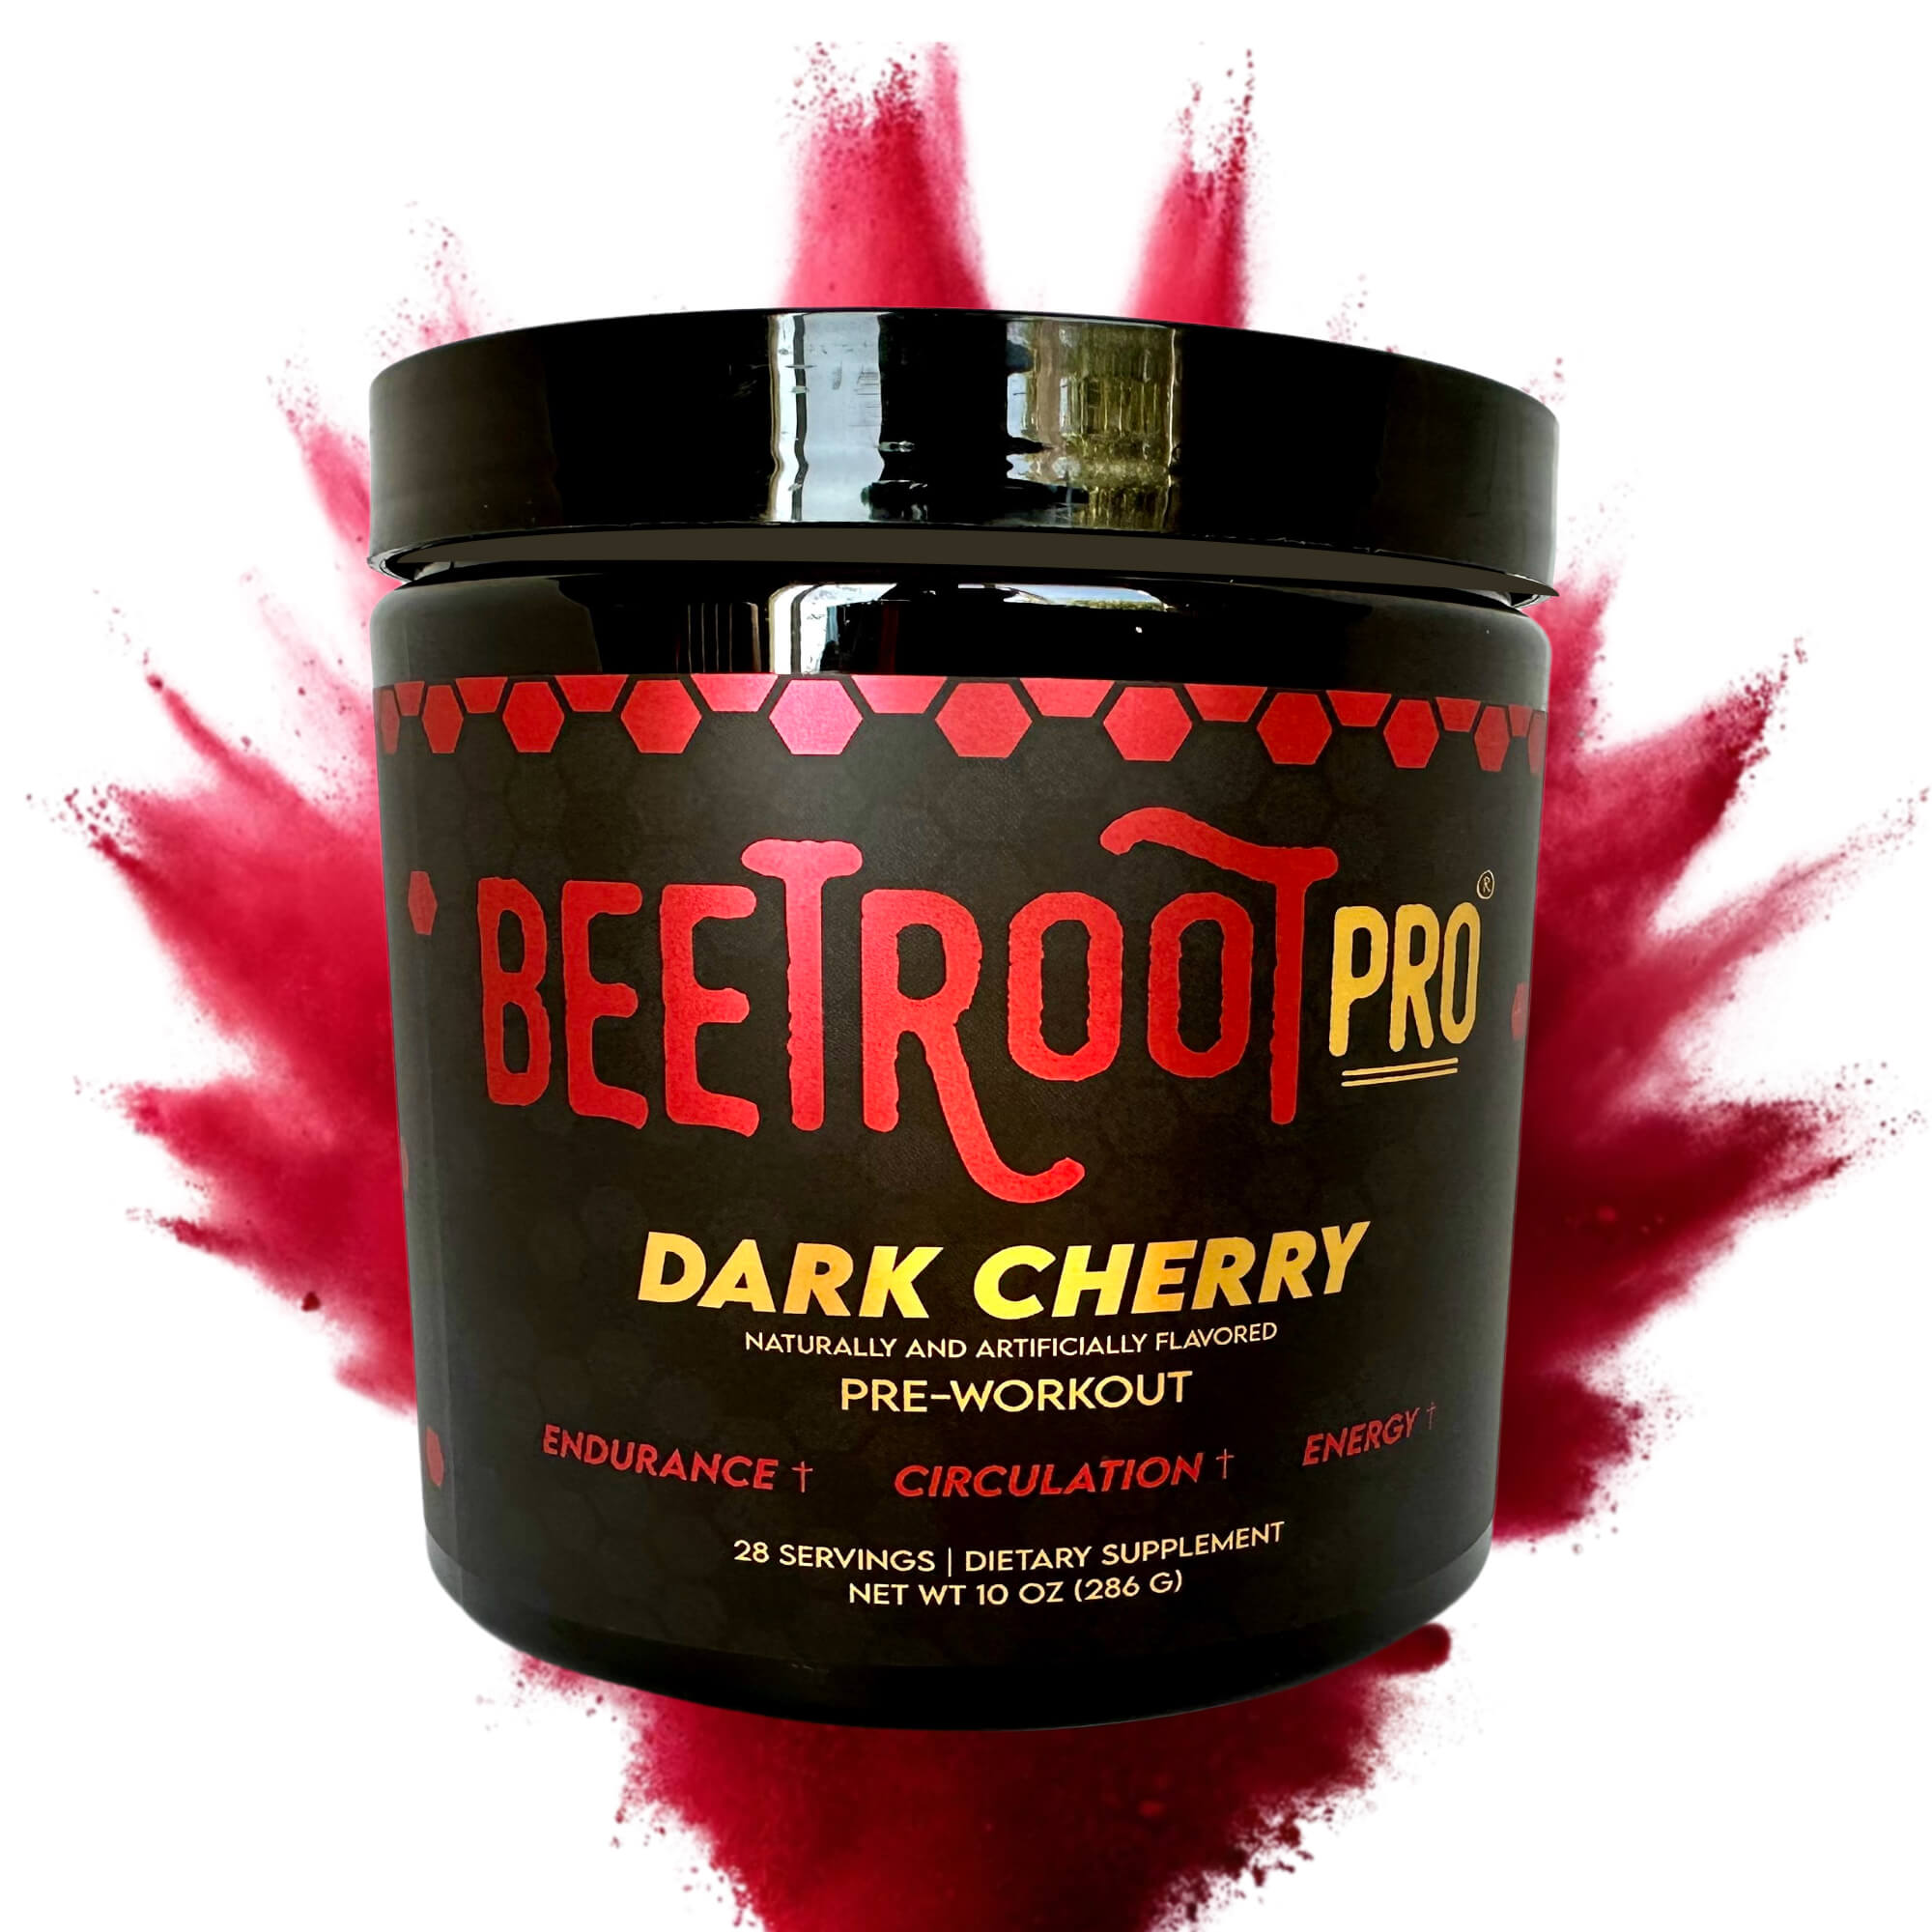 Beetroot Pro® Dark Cherry for Endurance, Nitric Oxide and Blood Flow